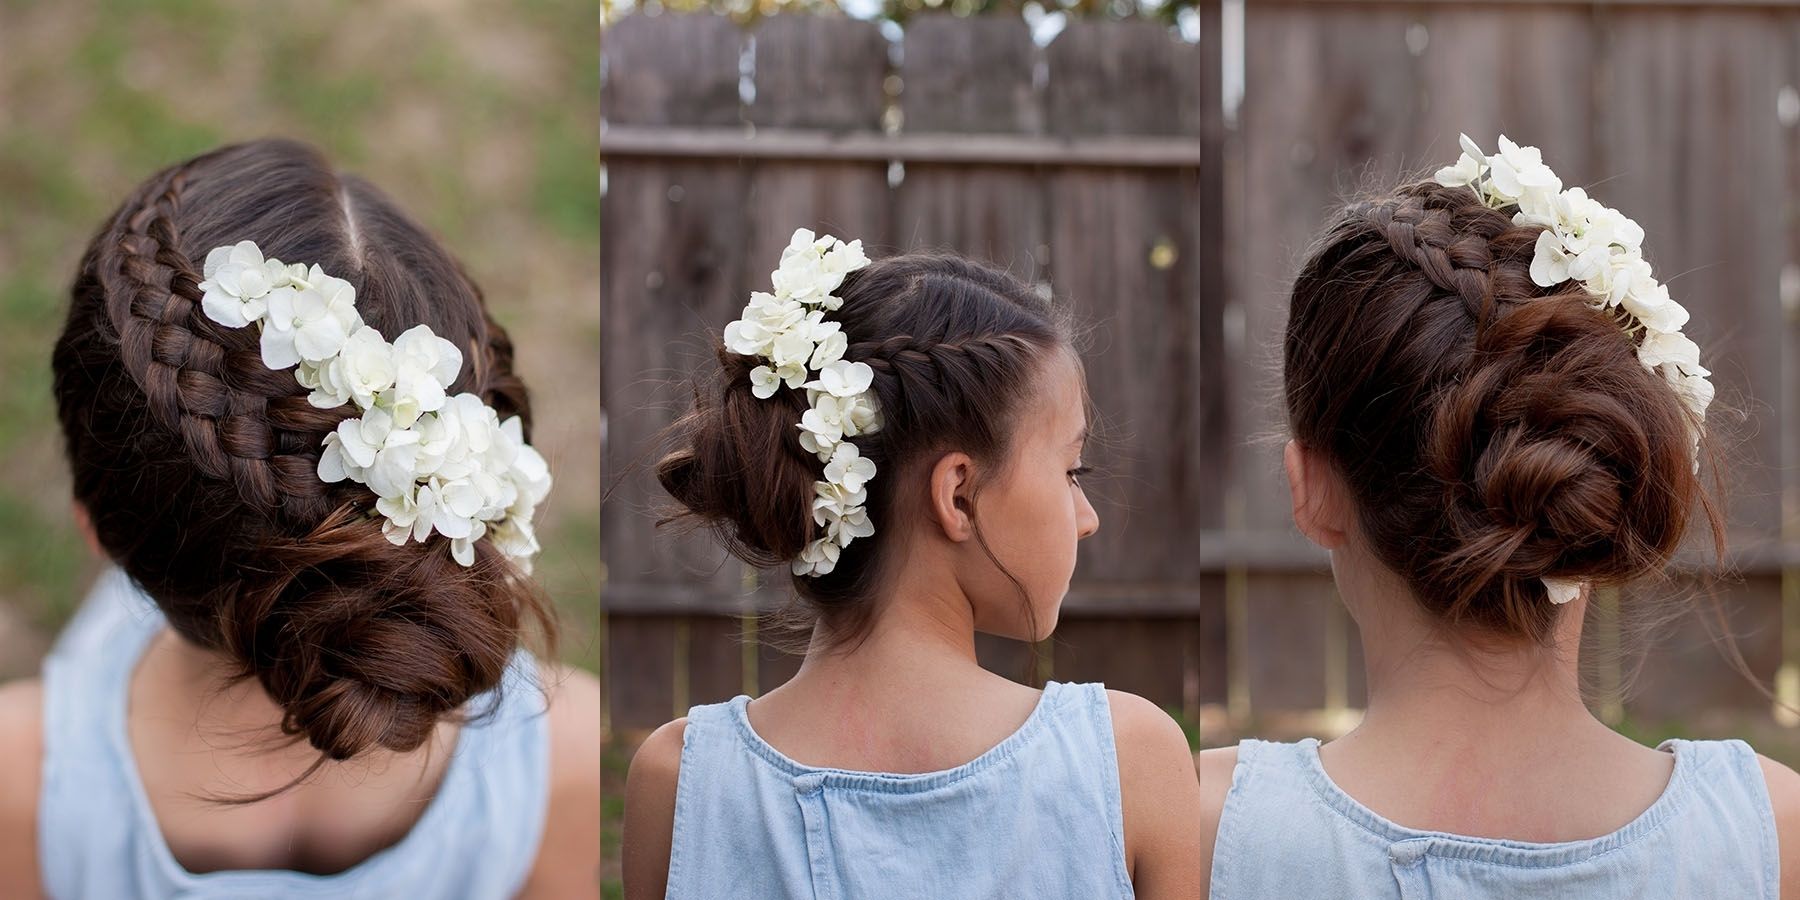 Preferred Two French Braid Hairstyles With Flower Intended For Braids With Flowers (View 5 of 15)